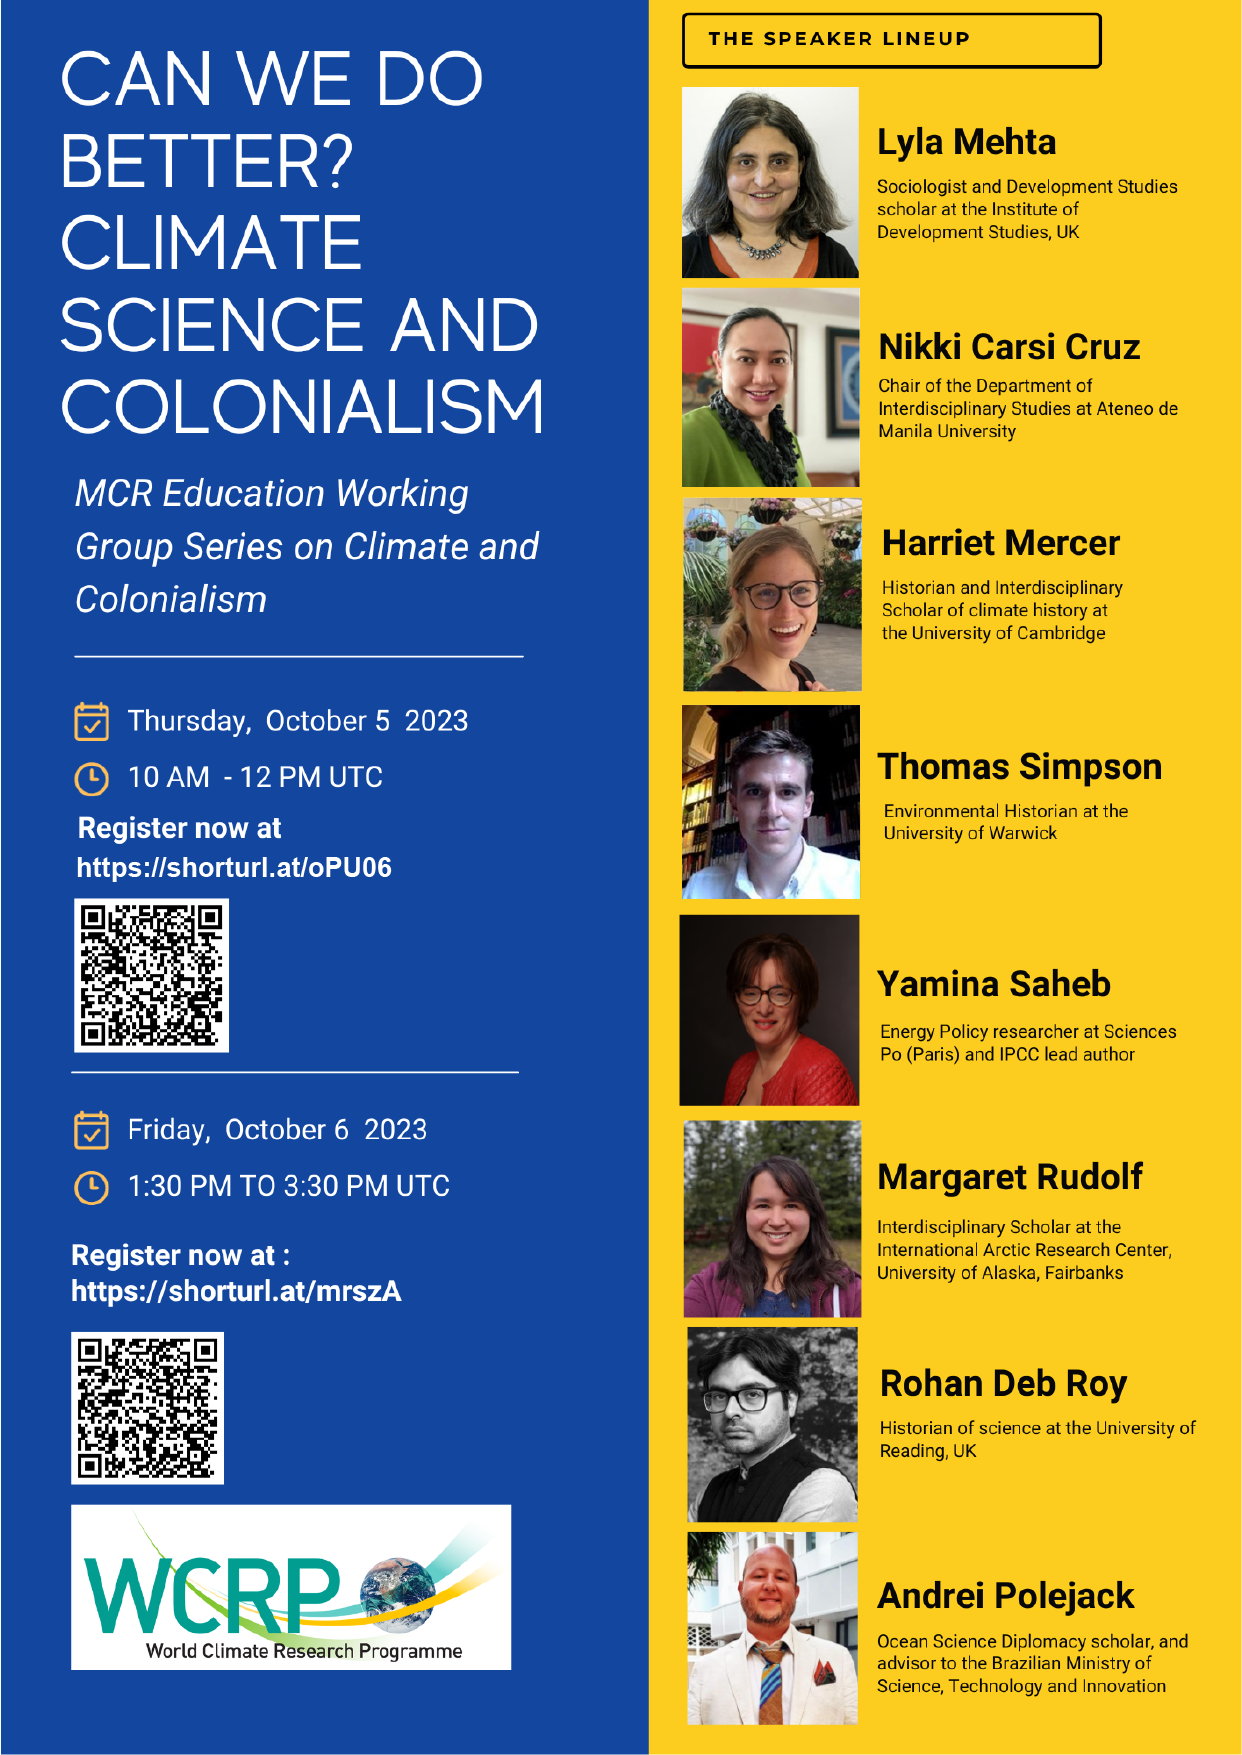 MCR Education Working Group Series on Climate and Colonialism